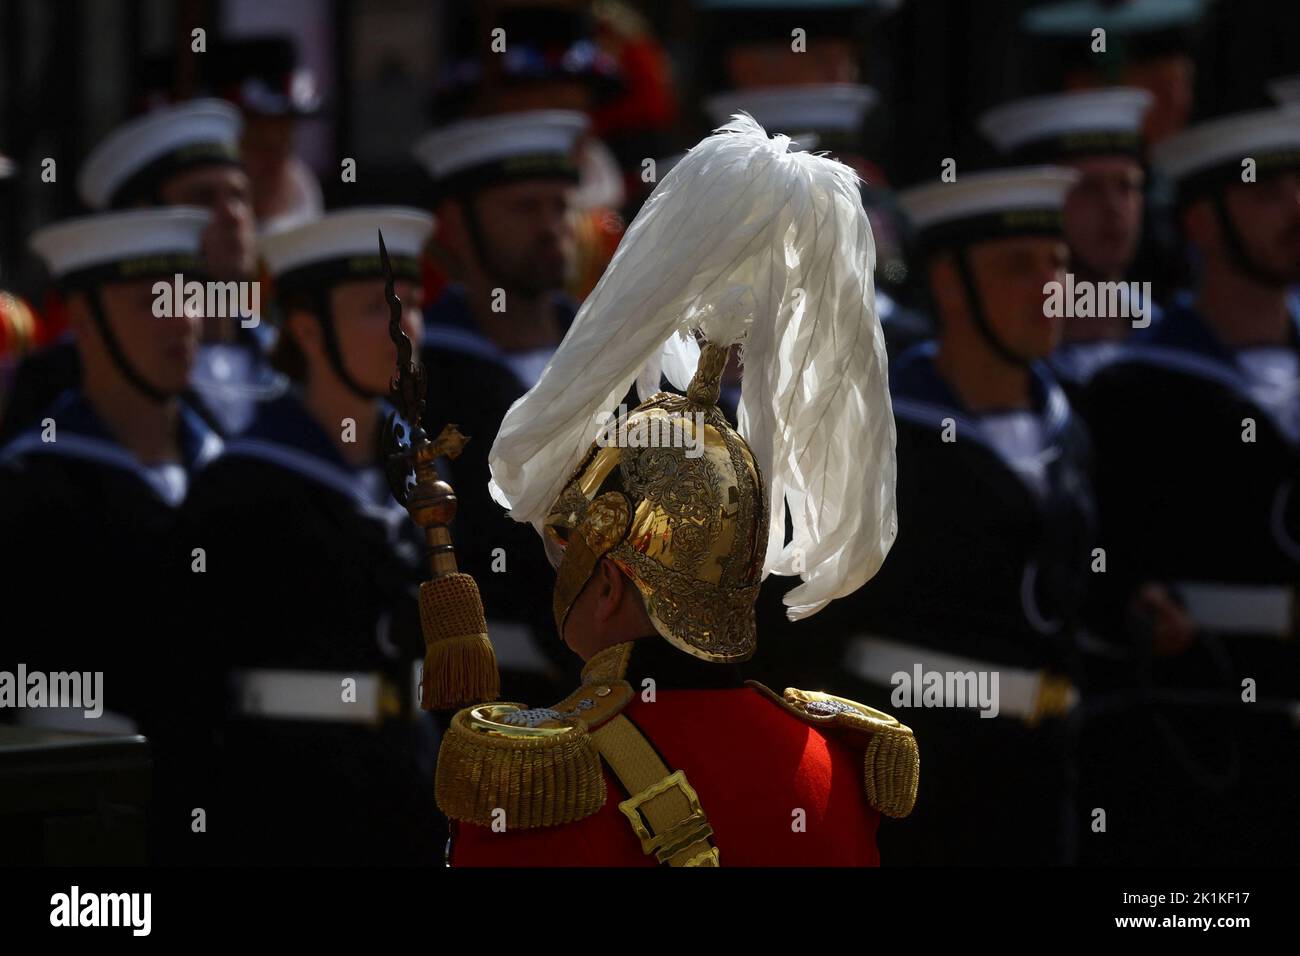 Guards stand outside Westminster Abbey on the day of the state funeral and burial of Britain's Queen Elizabeth, in London, Britain, September 19, 2022.  REUTERS/Kai Pfaffenbach Stock Photo